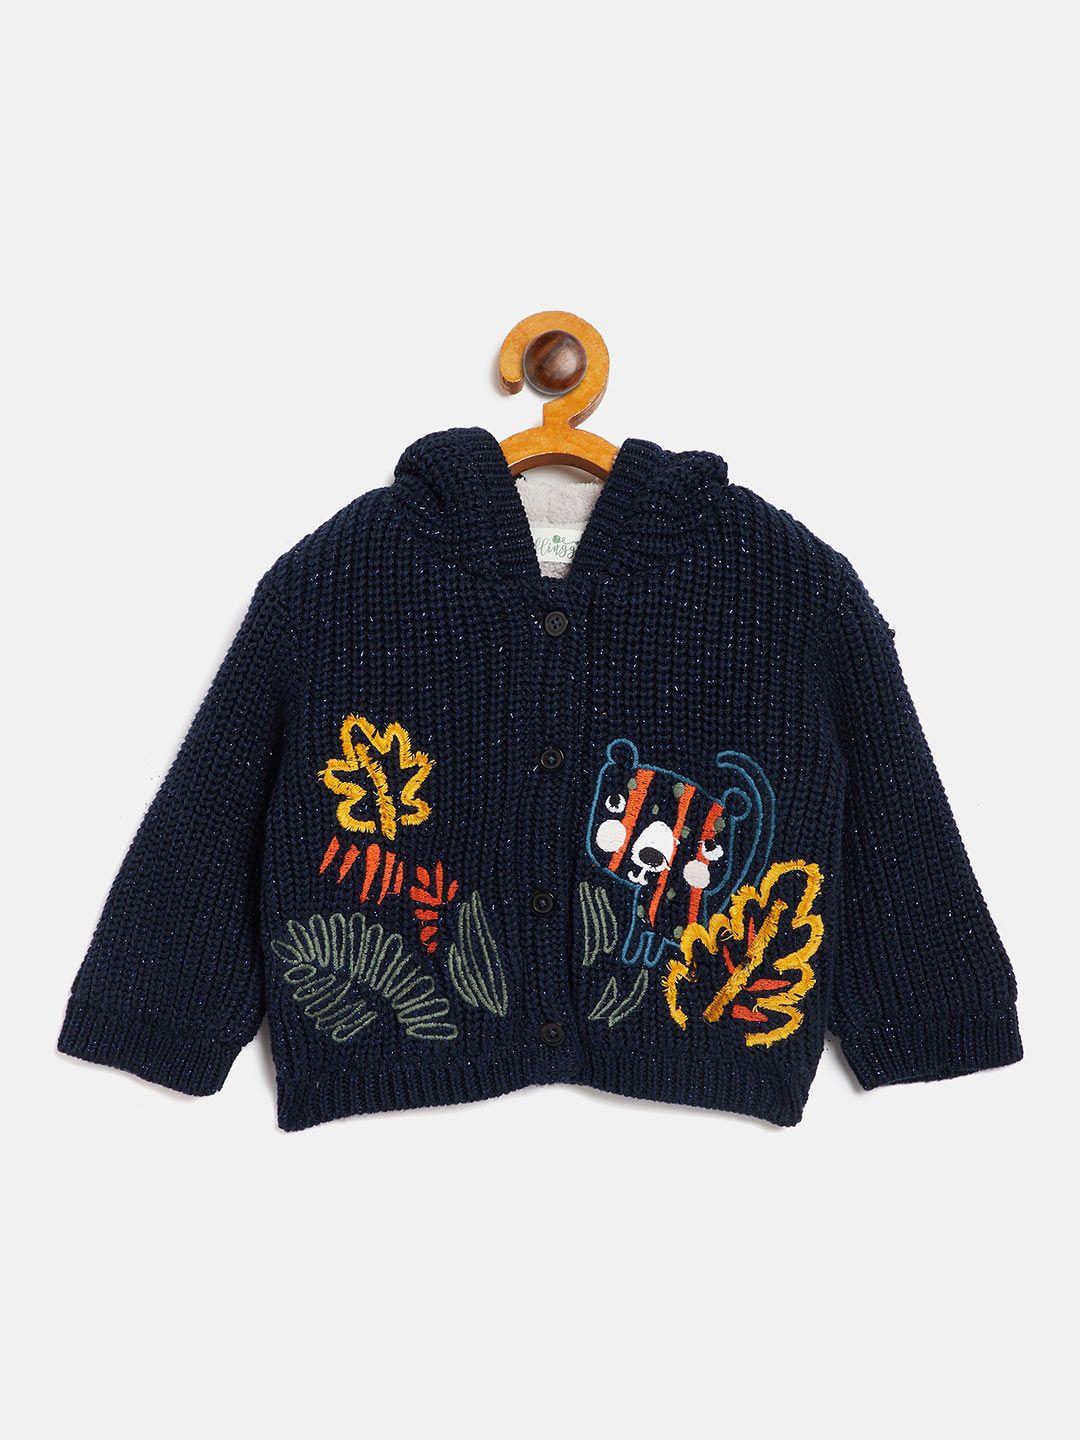 wildlinggs infants embroidered pure cotton cardigan with embroidered detail sweater